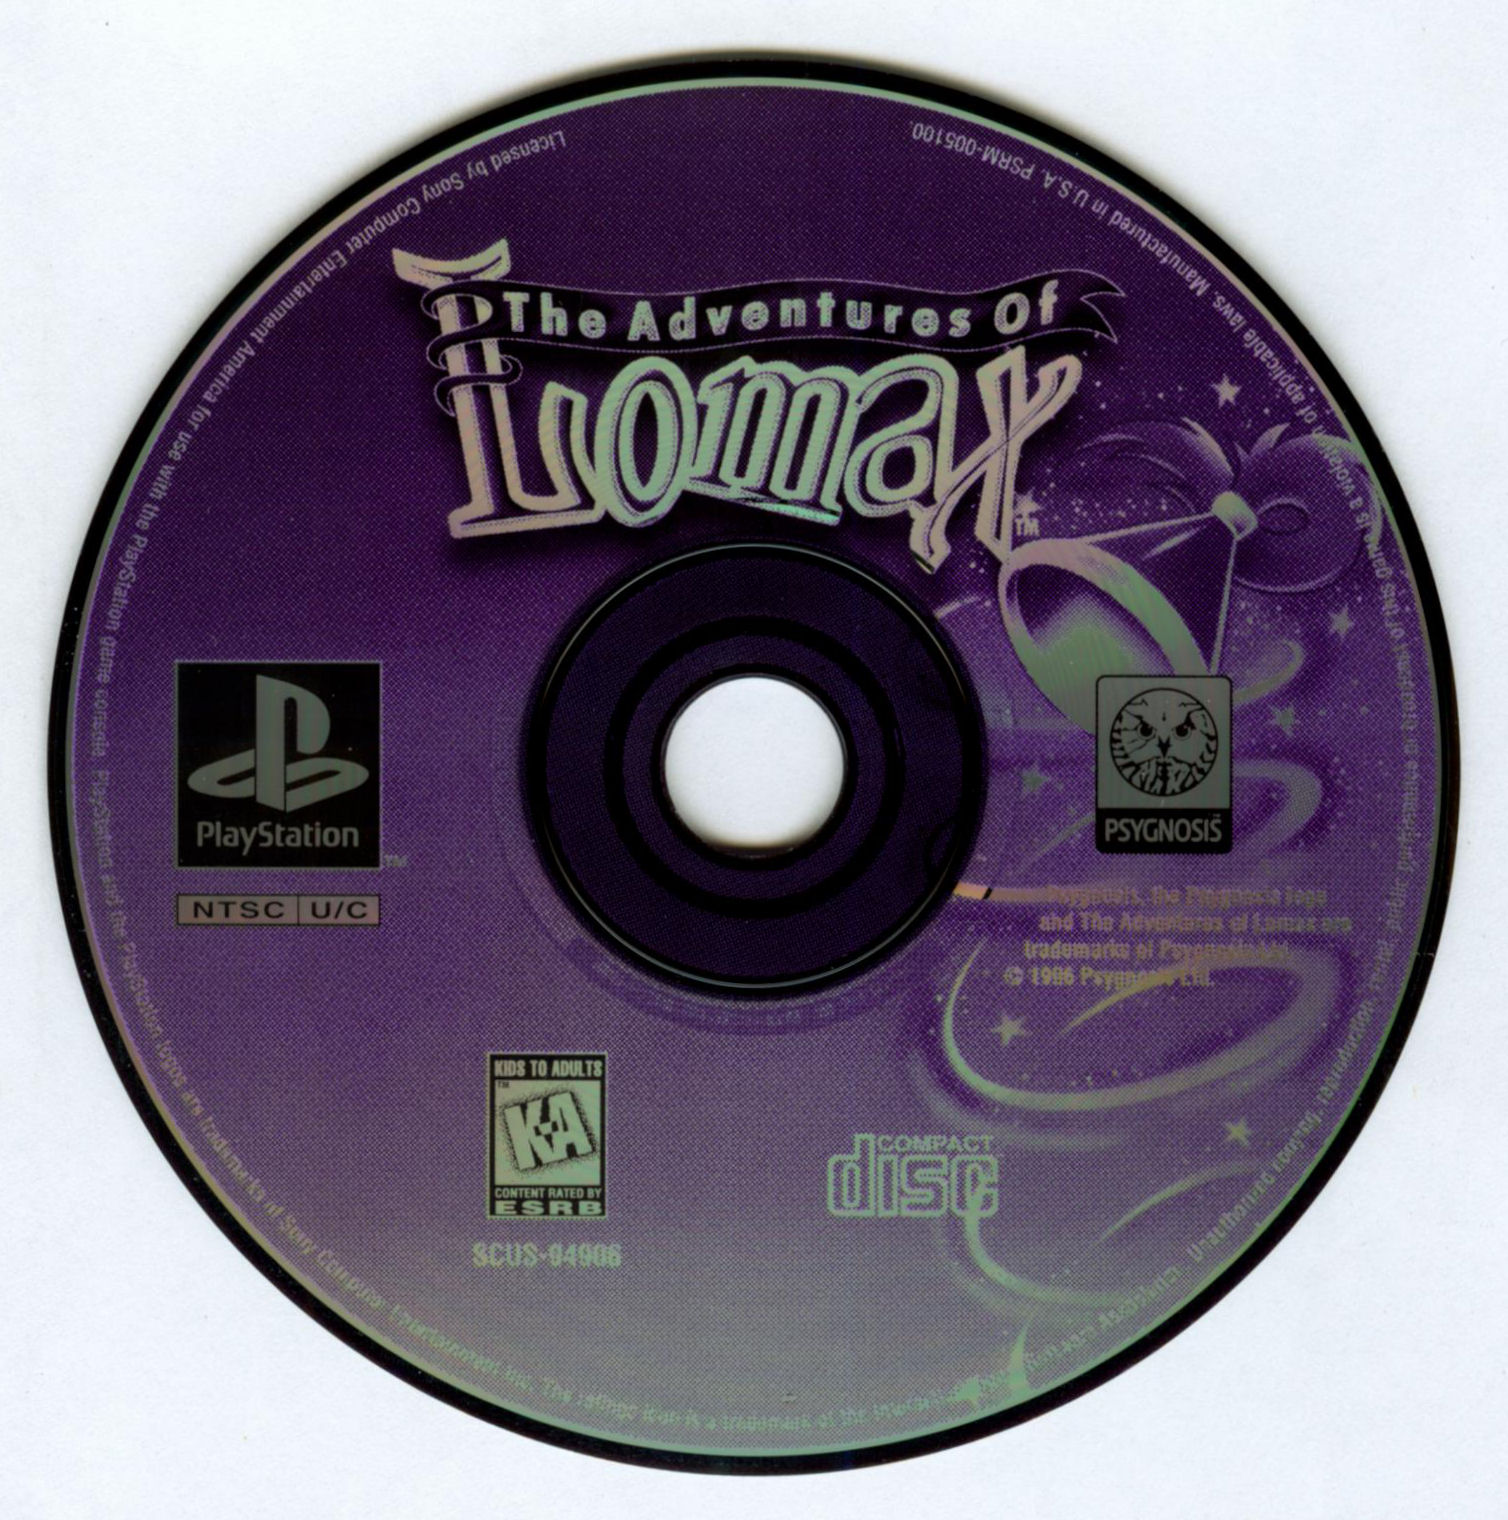 The adventure of Lomax PSX cover